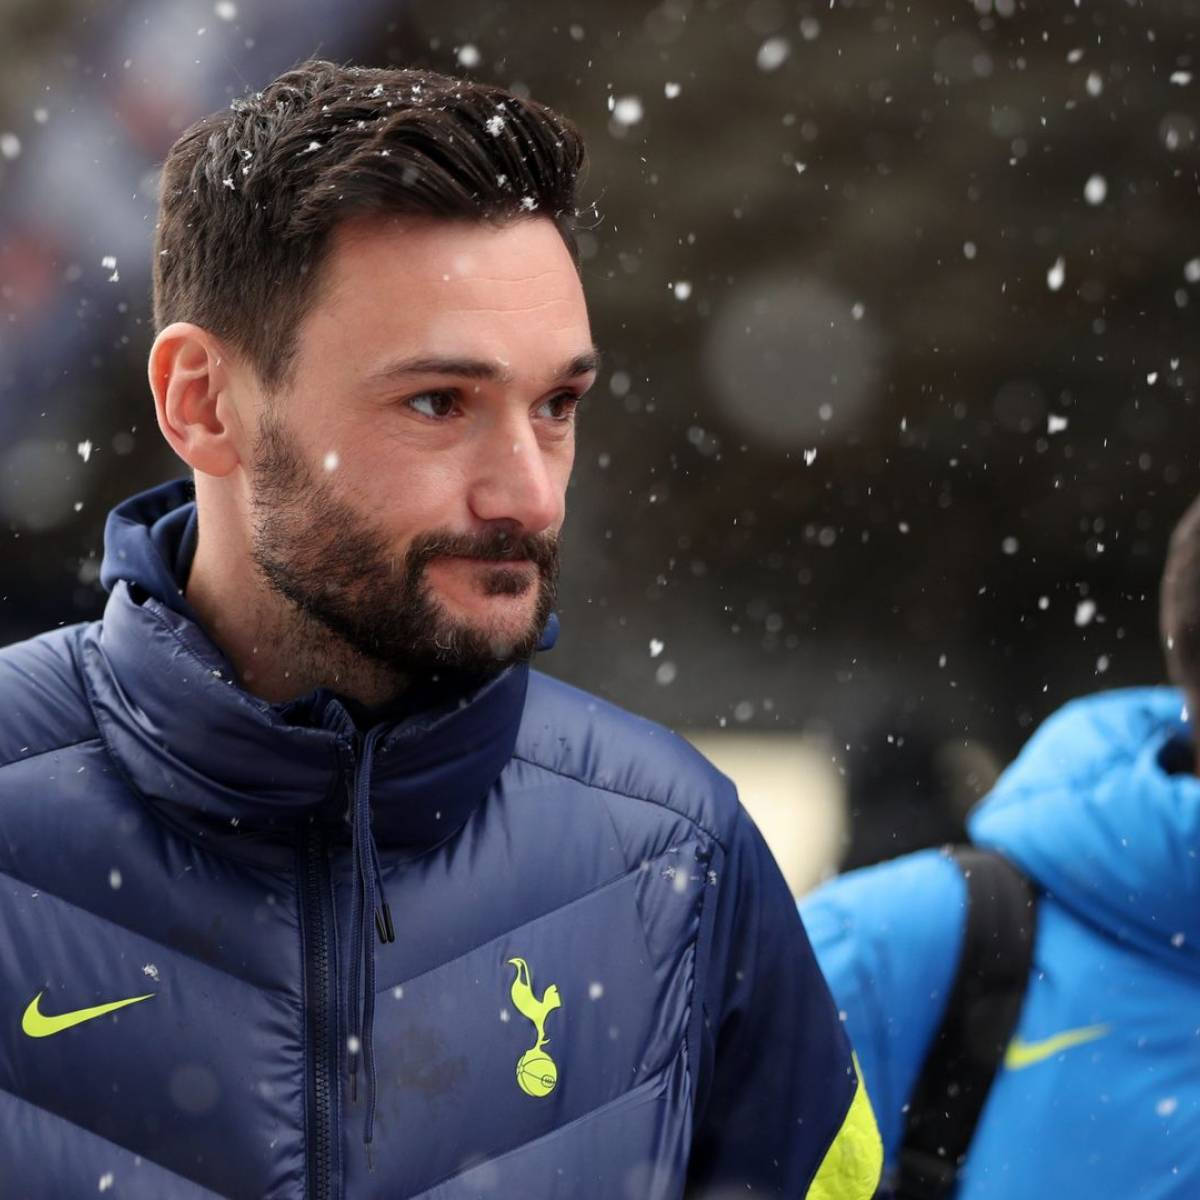 Hugo Lloris - The Goalkeeper Star Standing Confidently On A Snowy Day